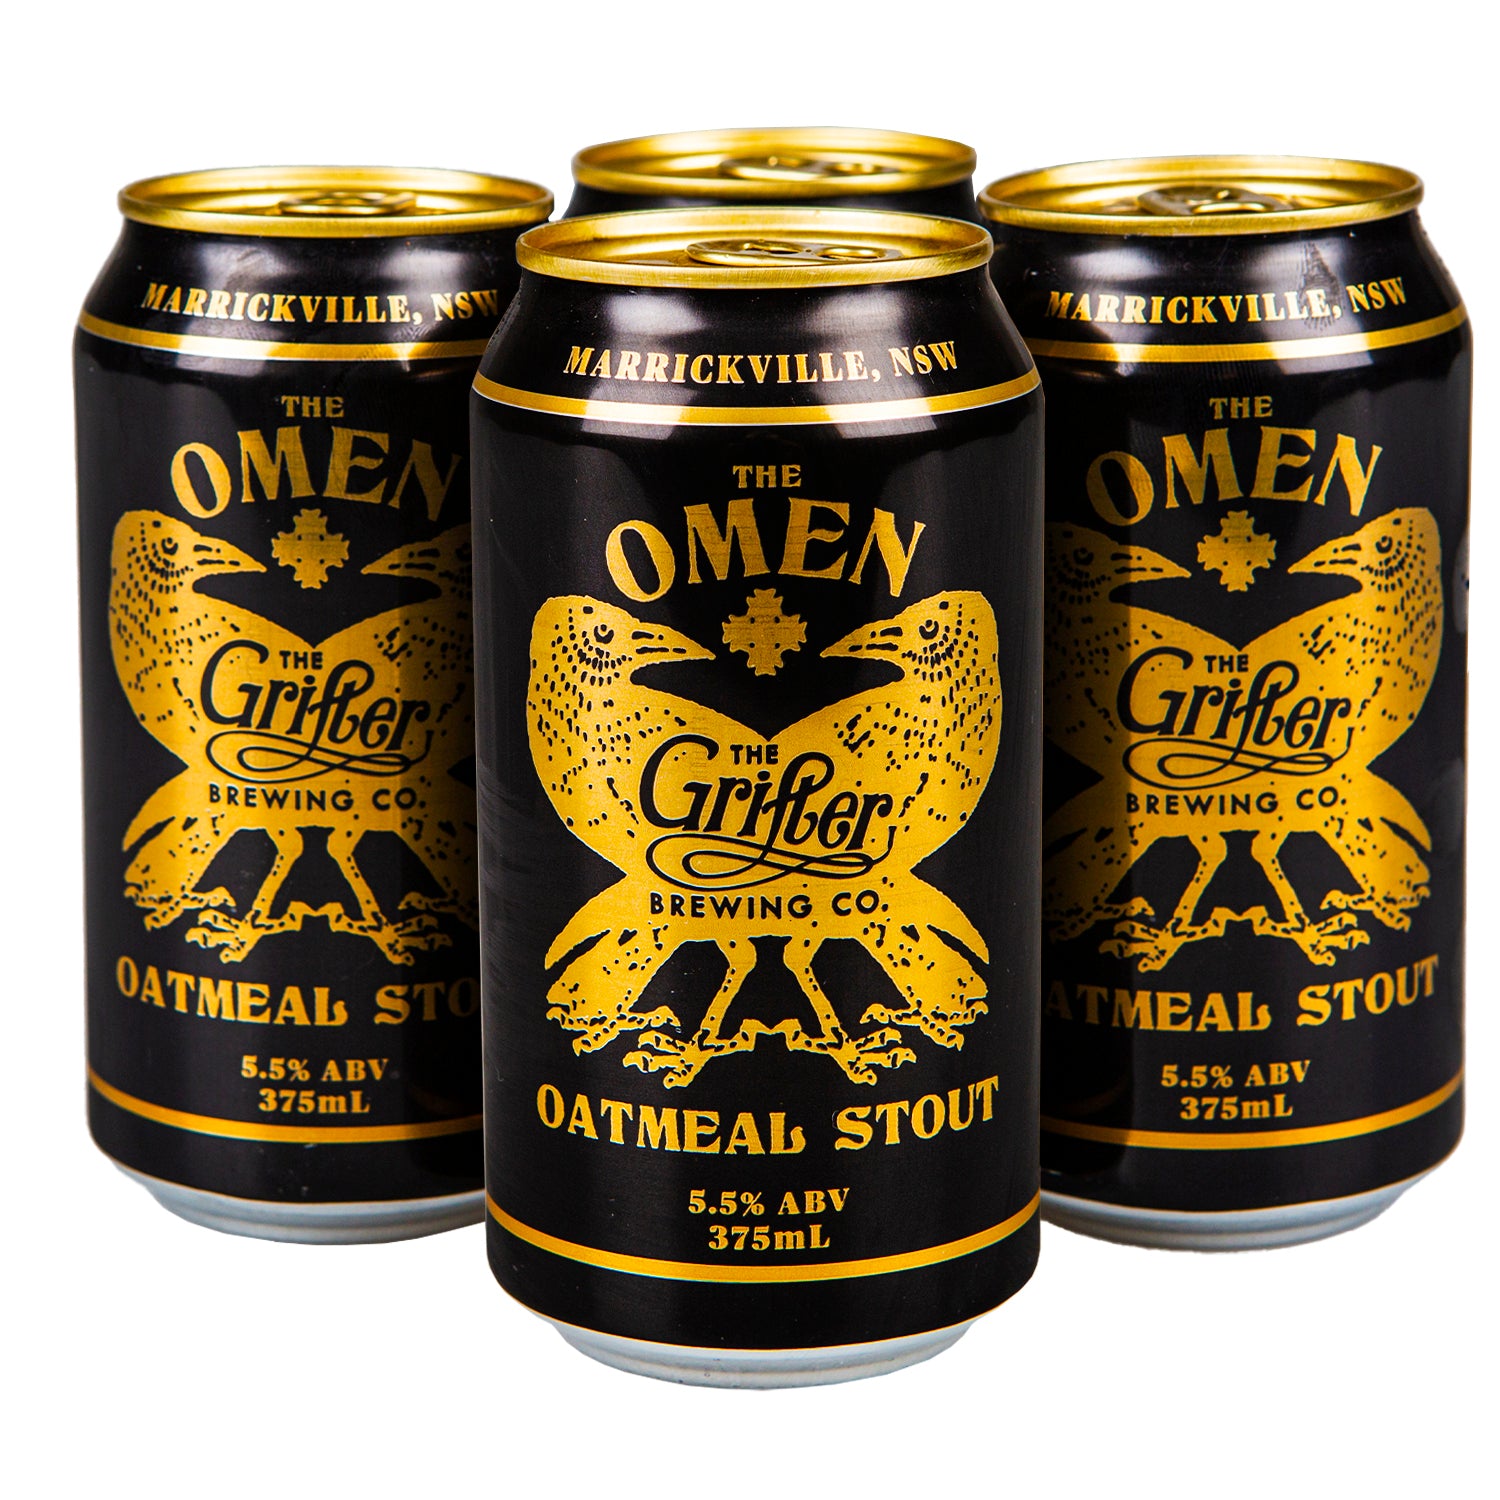 THE OMEN OATMEAL STOUT CANS (CASE OF 24)